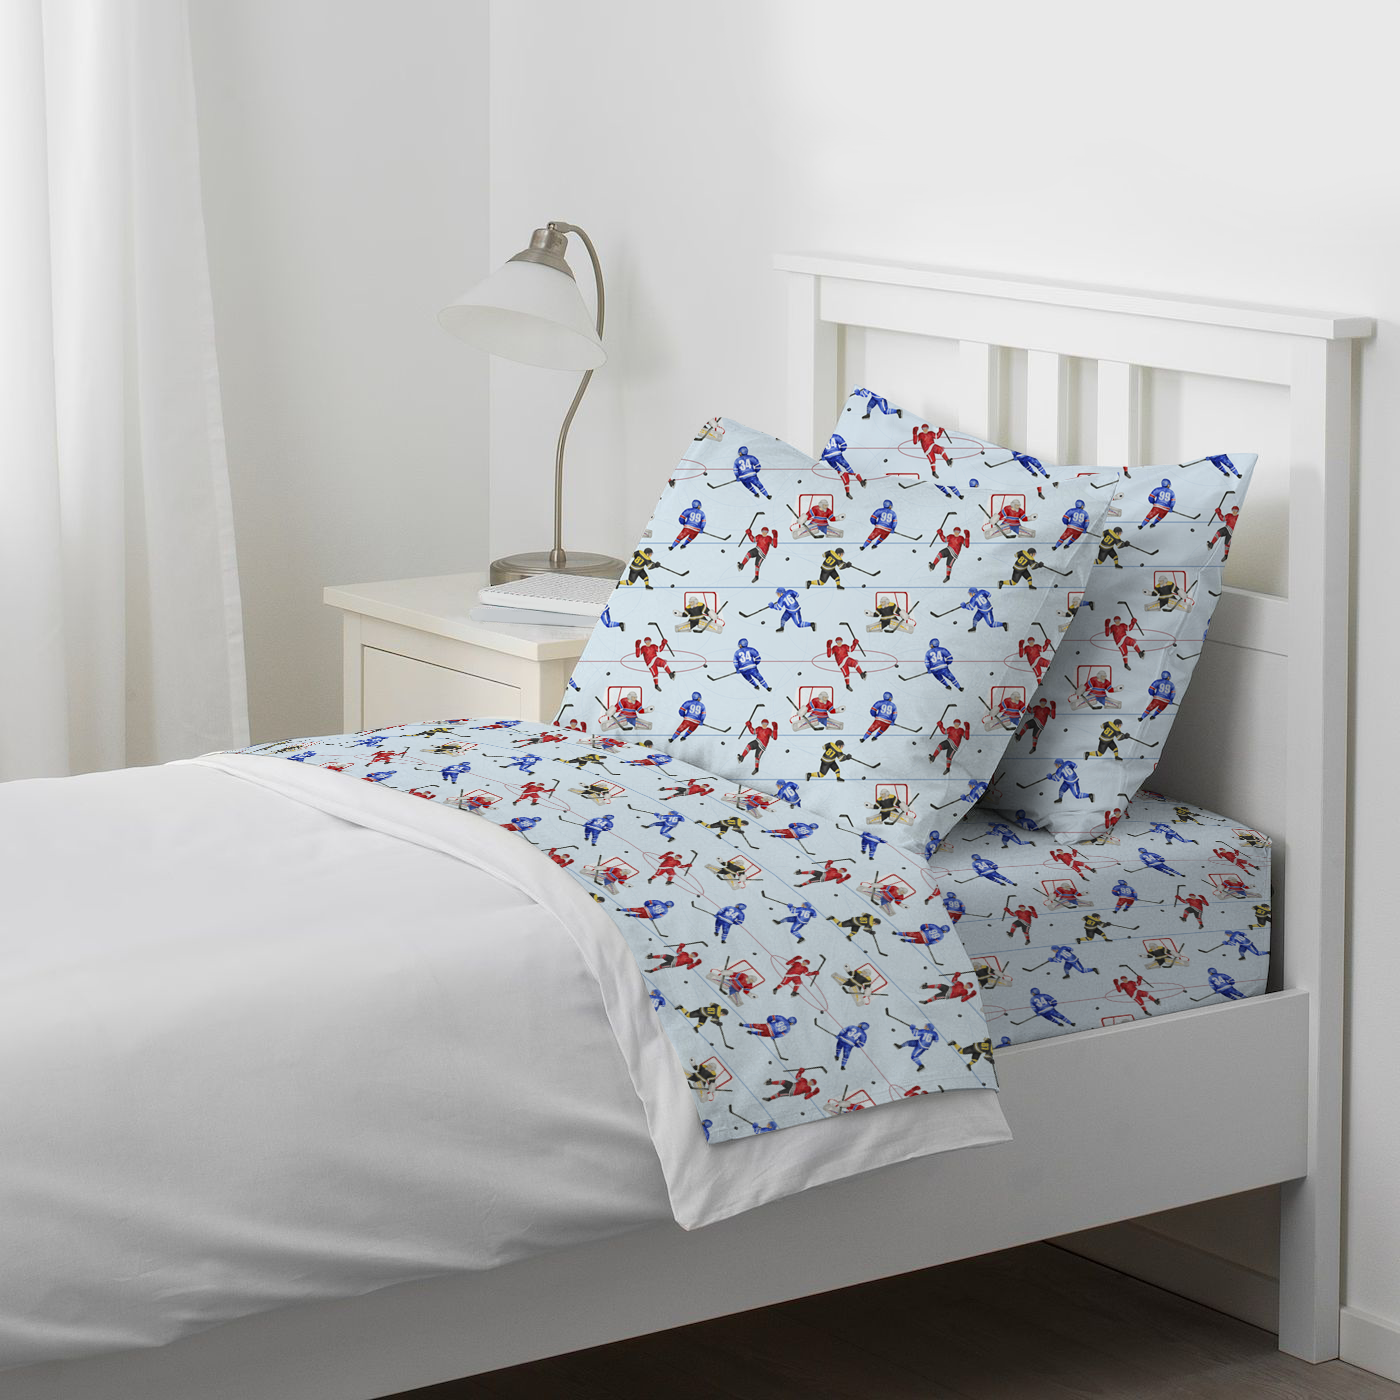 Game On Twin Bedding Set